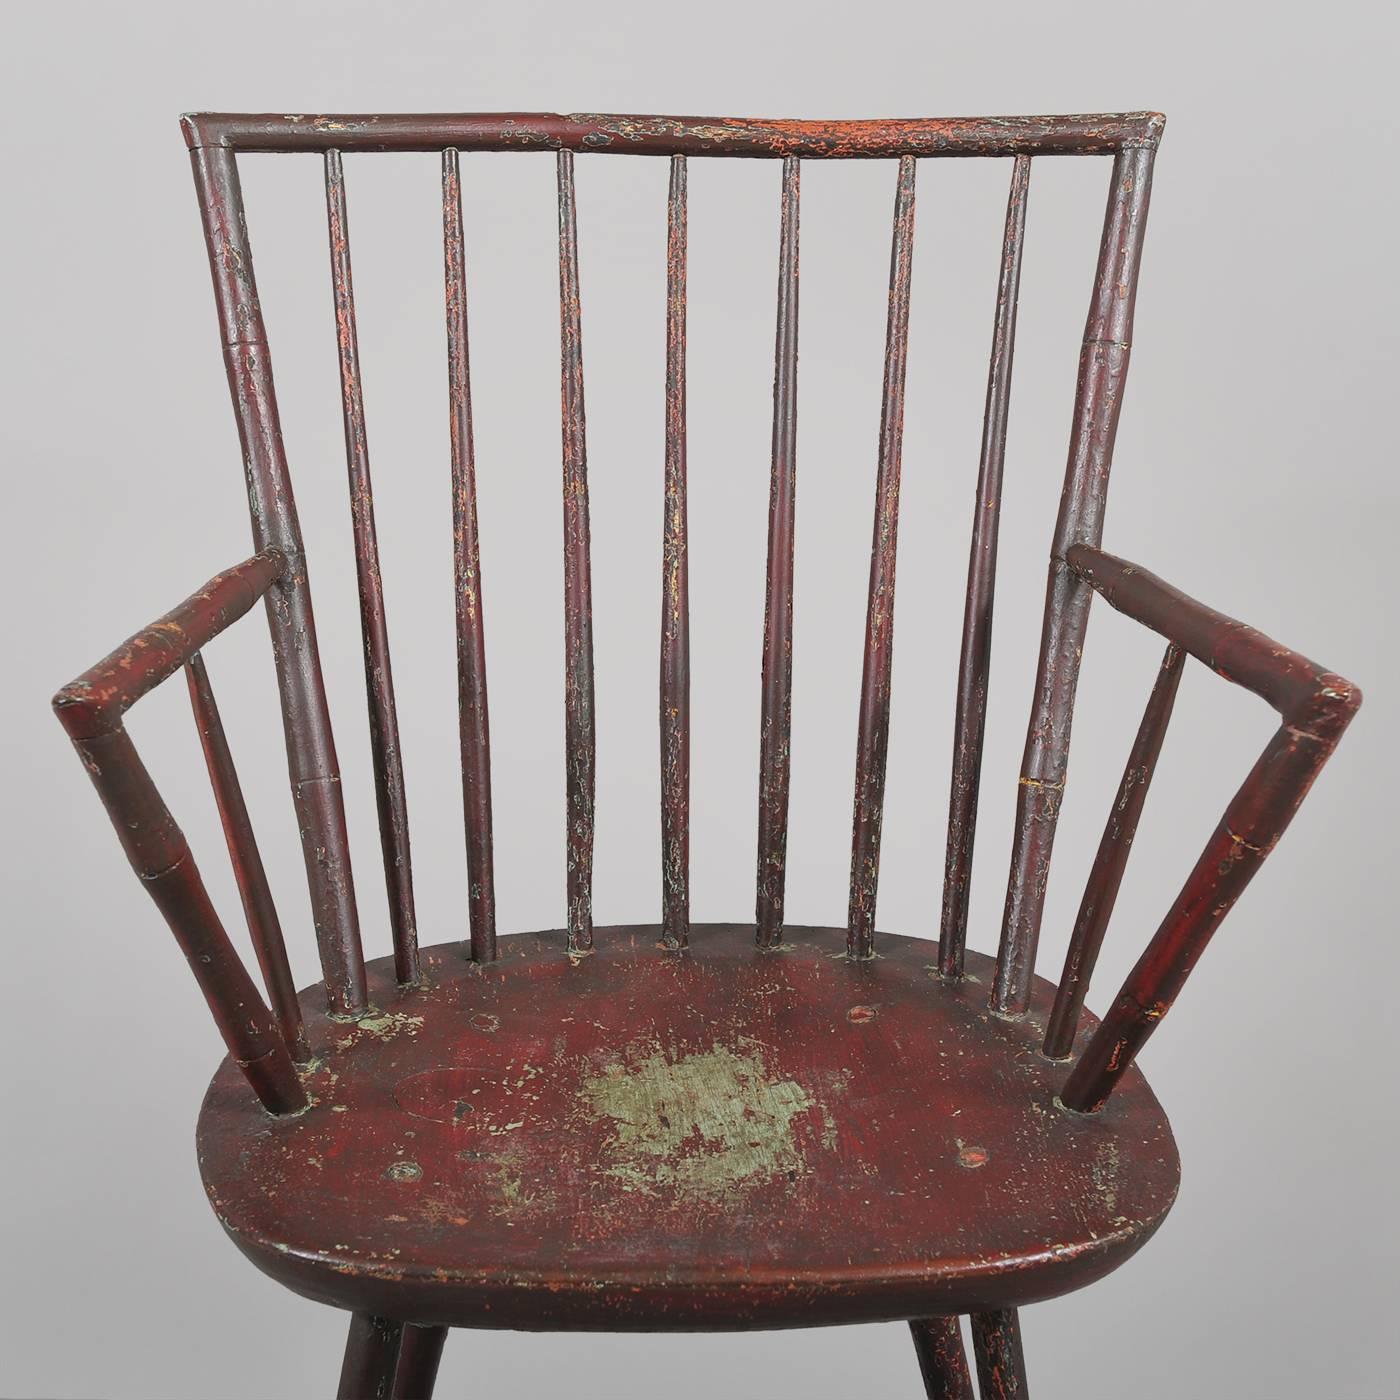 New England, probably Maine, circa 1790-1800.
Hardwoods, red over green paint.
Condition: Fine condition, minor imperfections, old red paint over earlier green.
This rare tall example was probably made for a craftsman and used for utilitarian